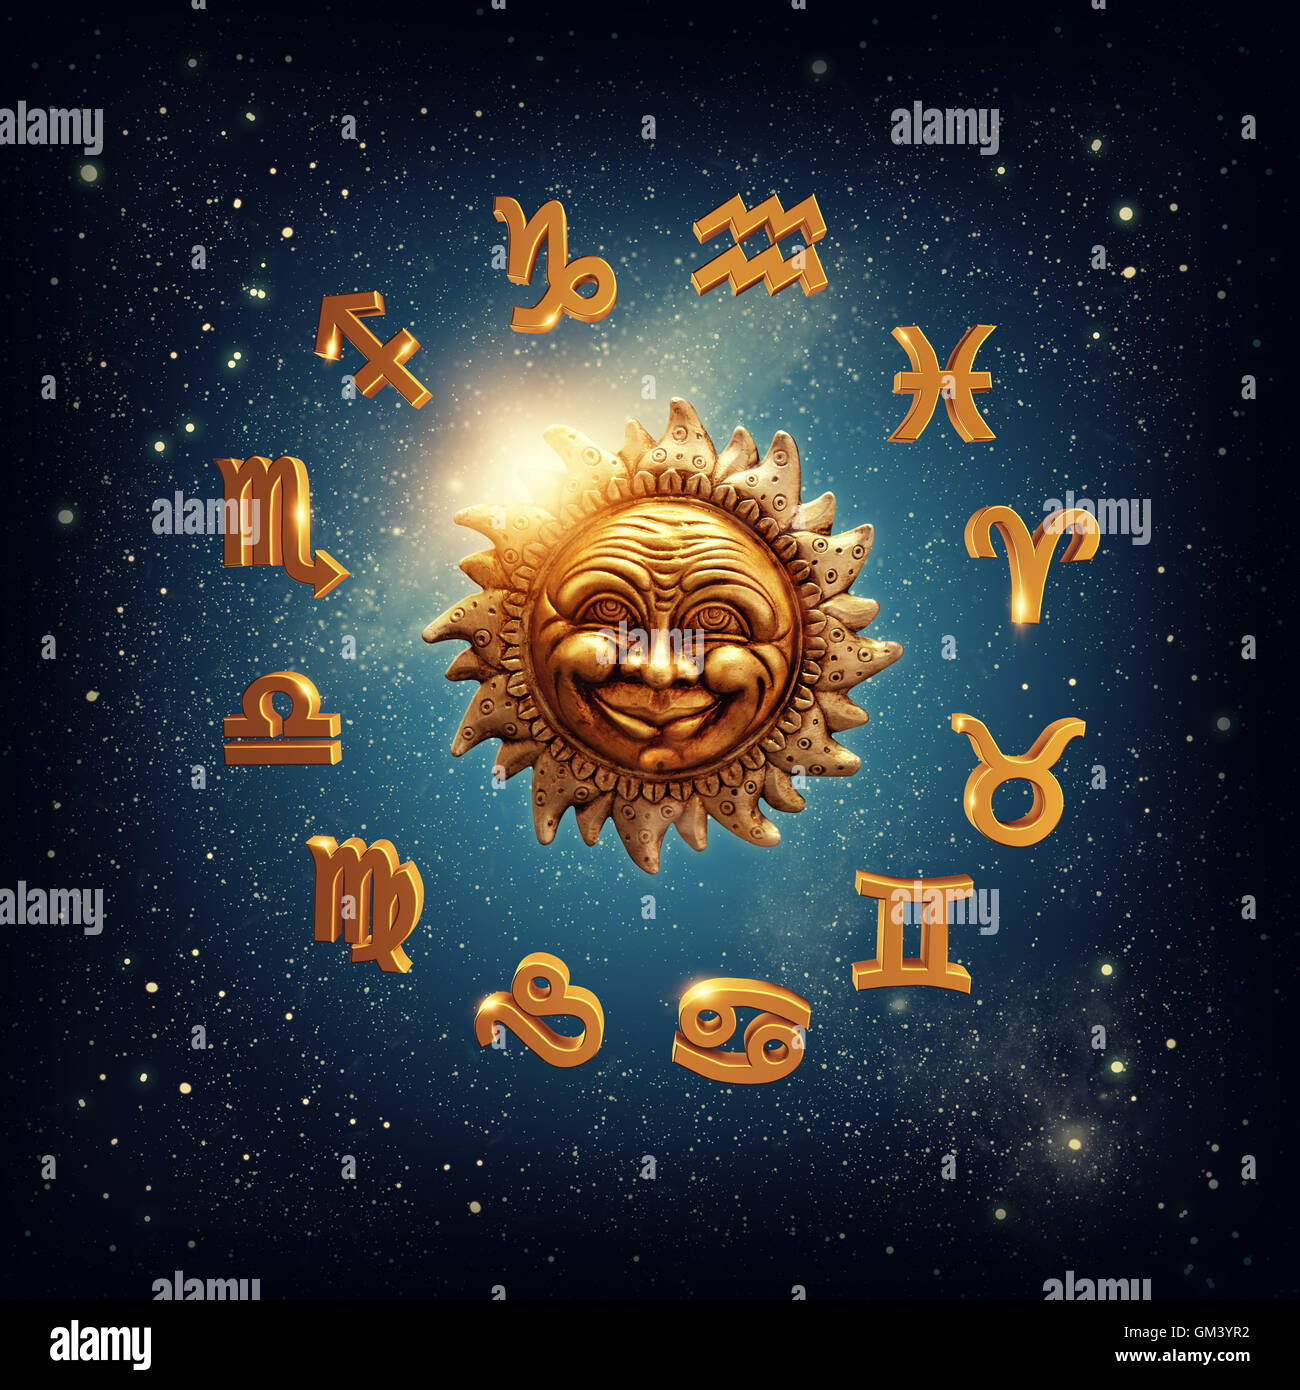 The sun surrounded by zodiac signs Stock Photo